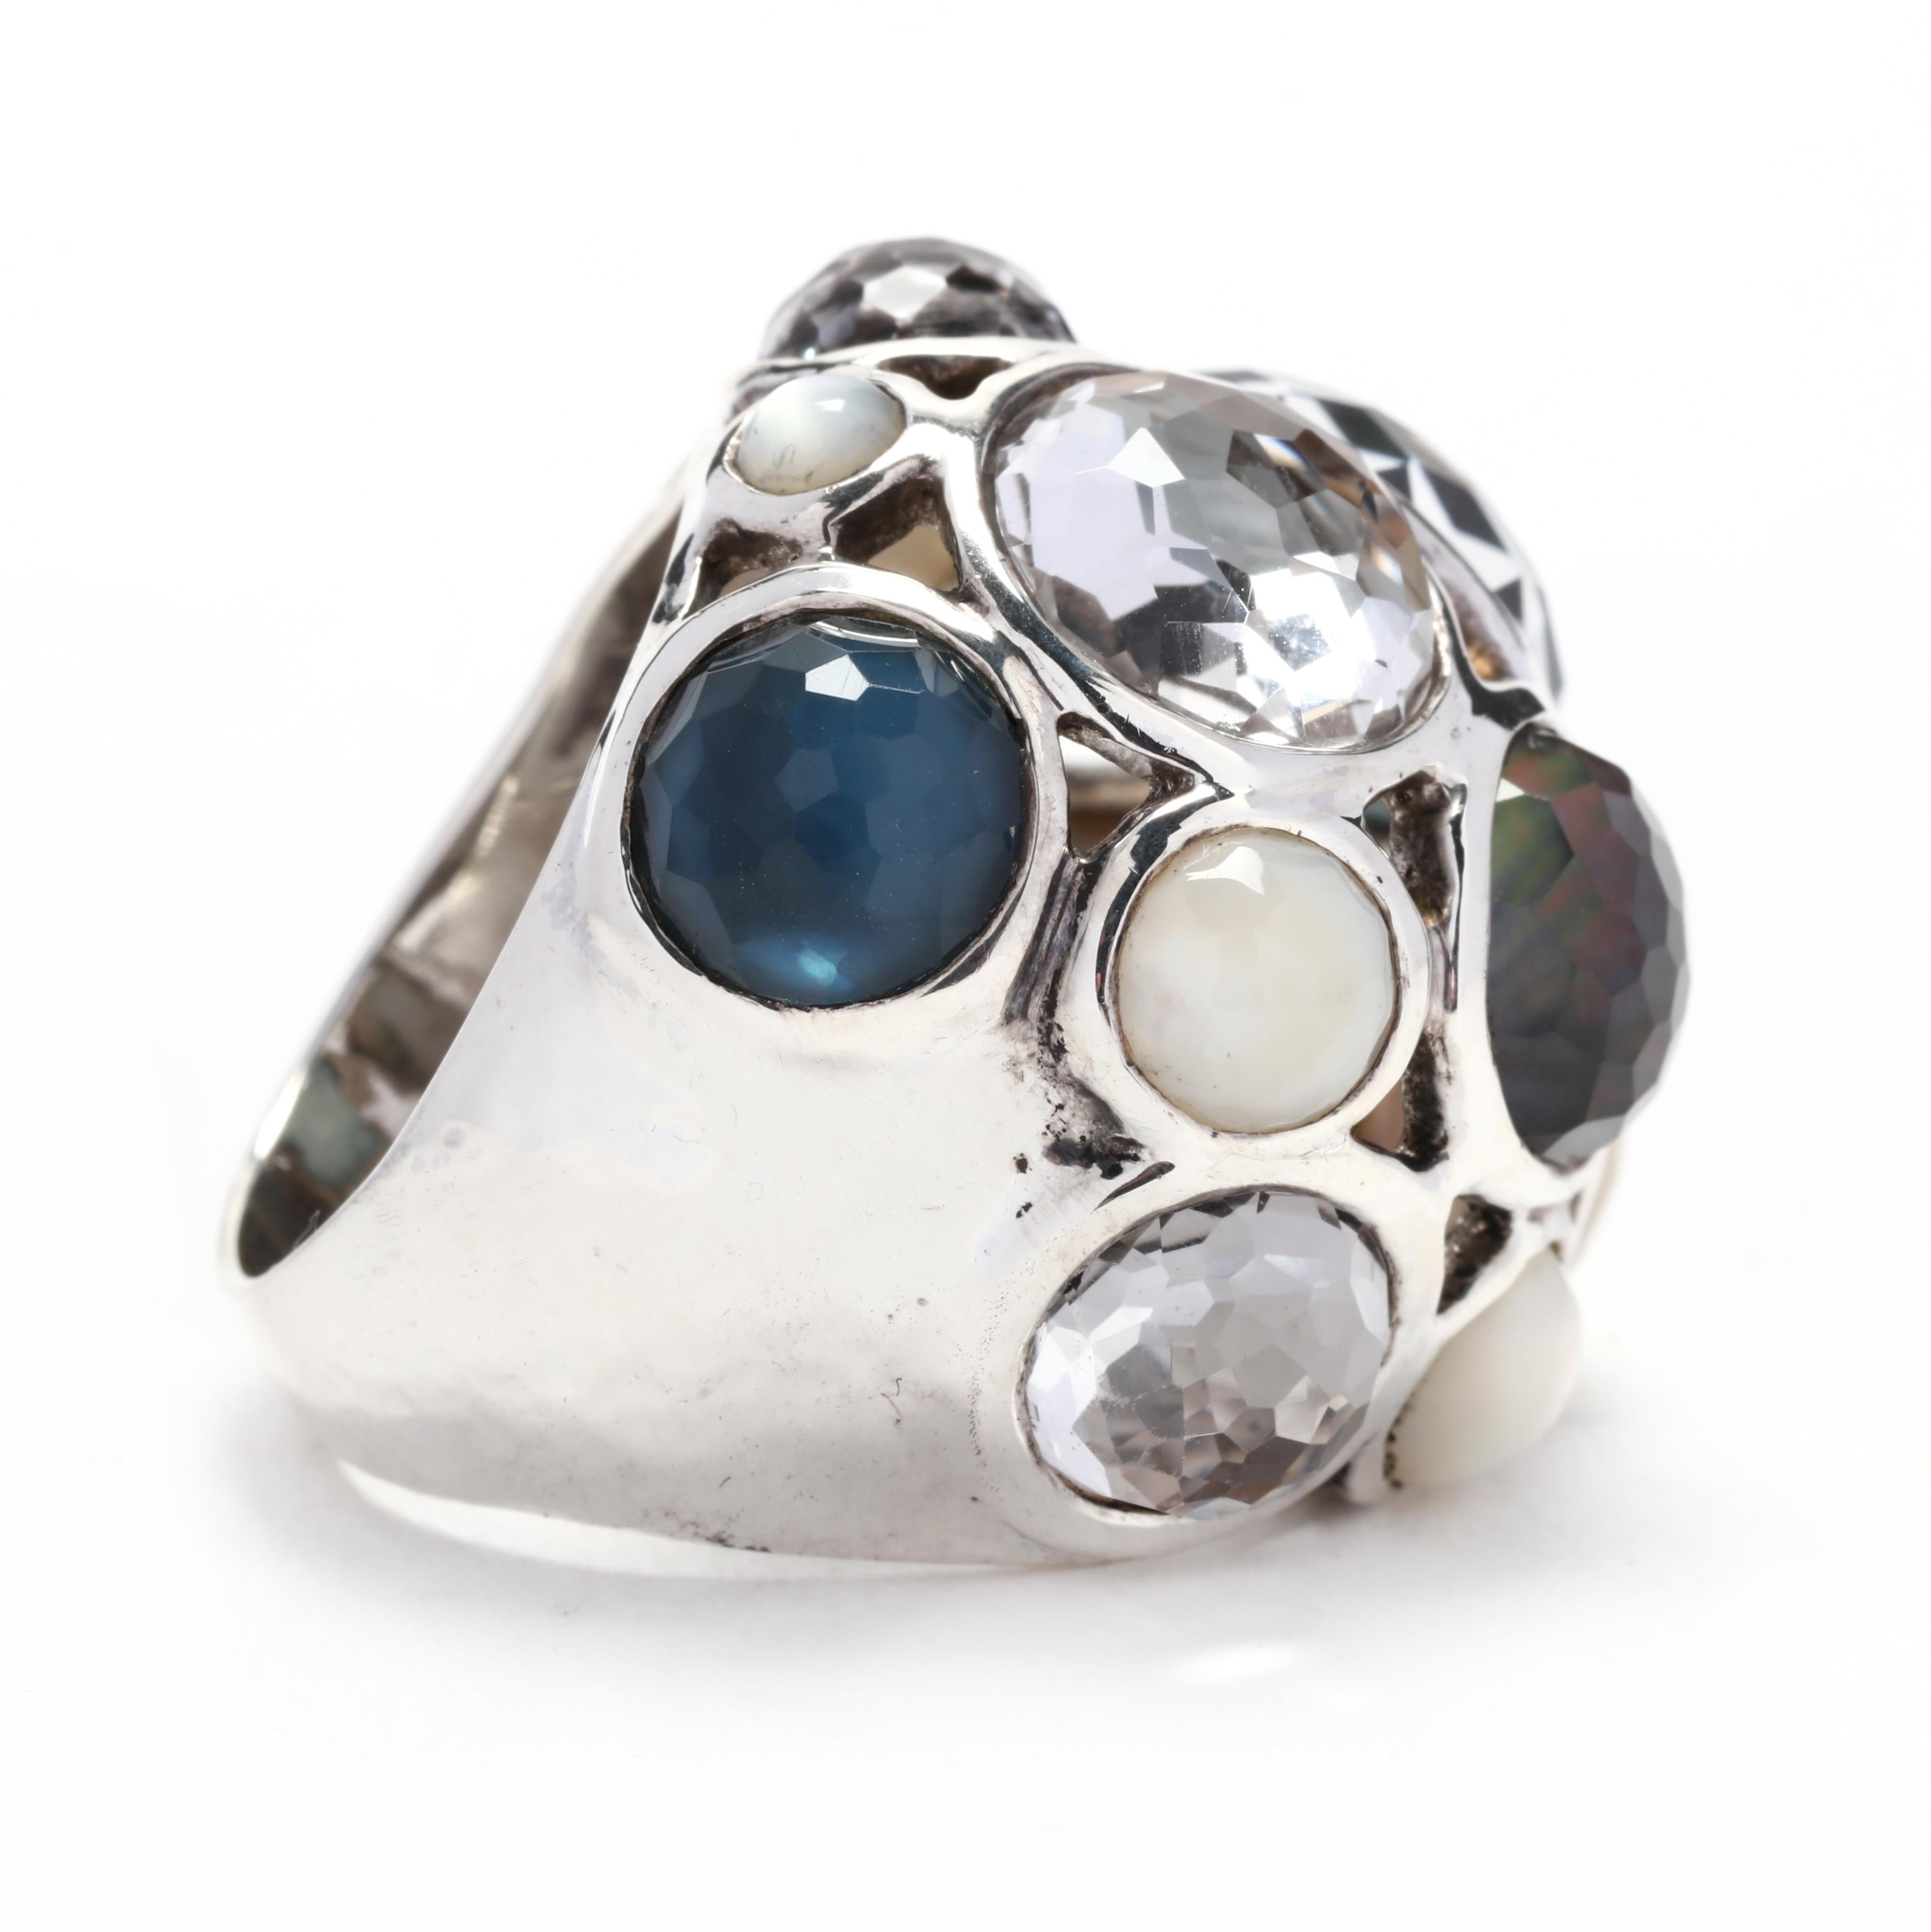 This Ippolita Rock Candy Blue Dome Ring is a statement piece that is sure to catch attention. Made from sterling silver, this ring features a large dome-shaped blue quartz gemstone that adds a pop of color to any outfit. With a ring size of 6.25, it